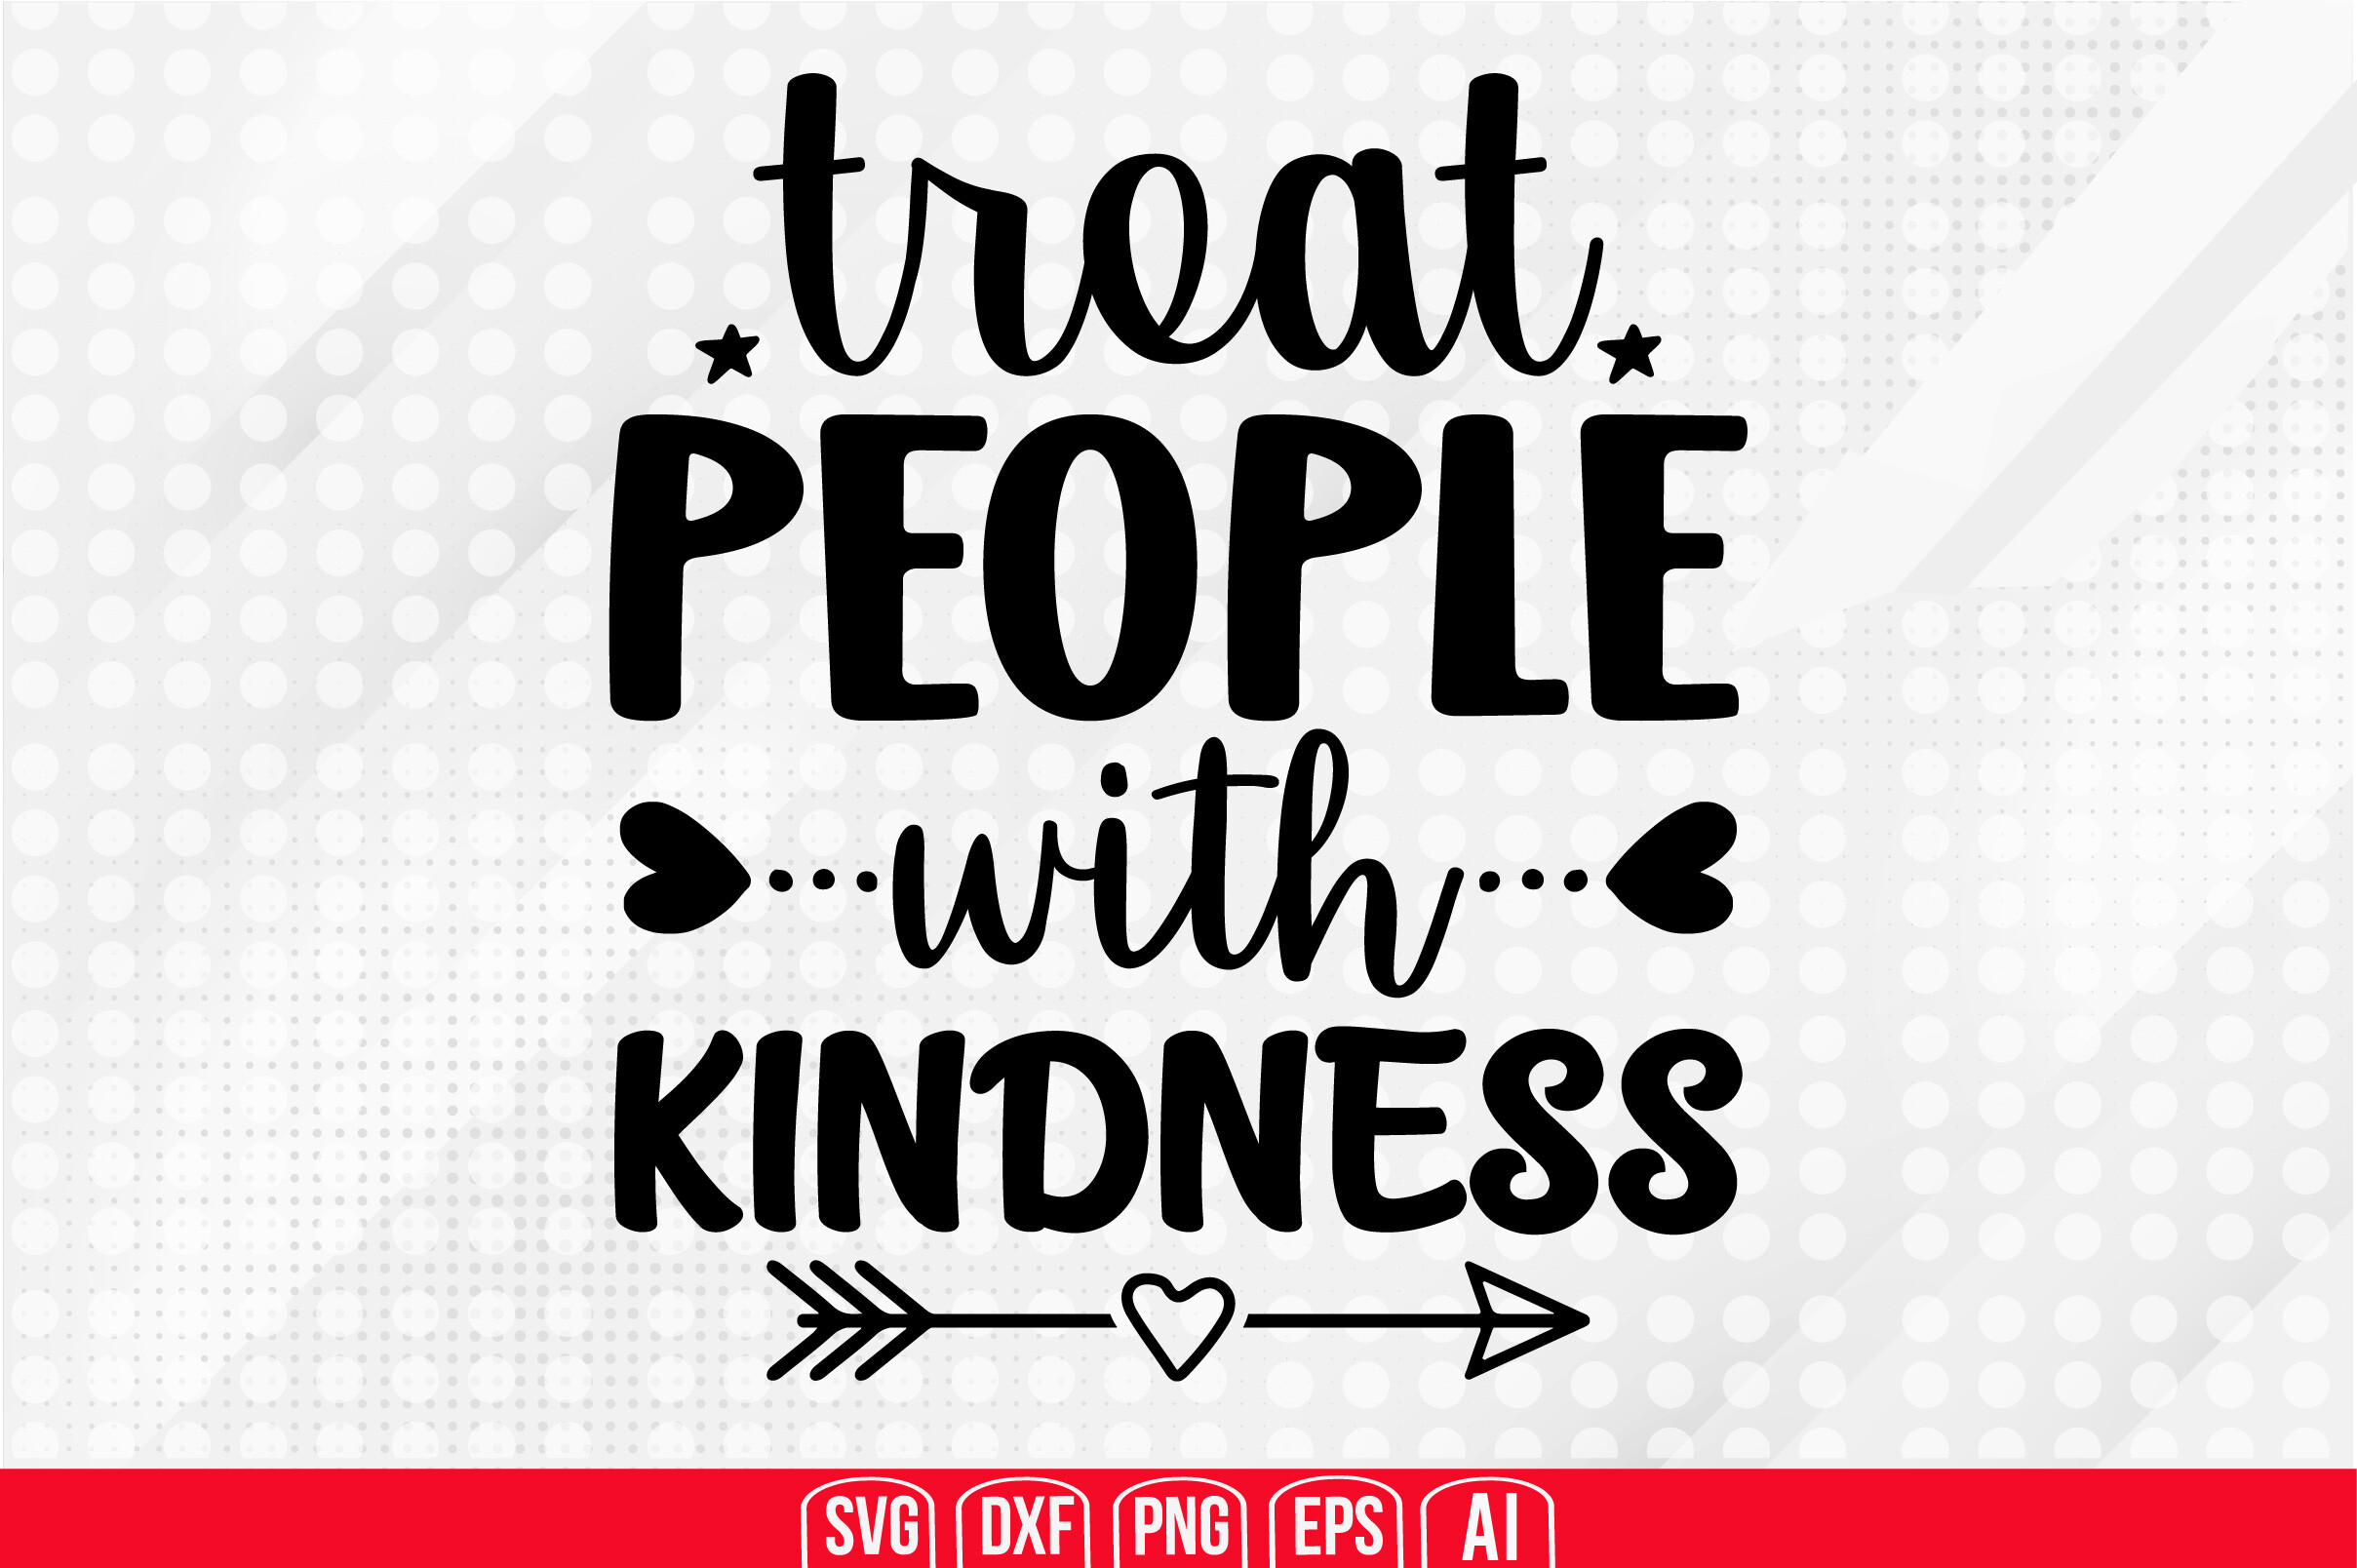 Treat People with Kindness Svg Graphic by TeeKing124 · Creative Fabrica